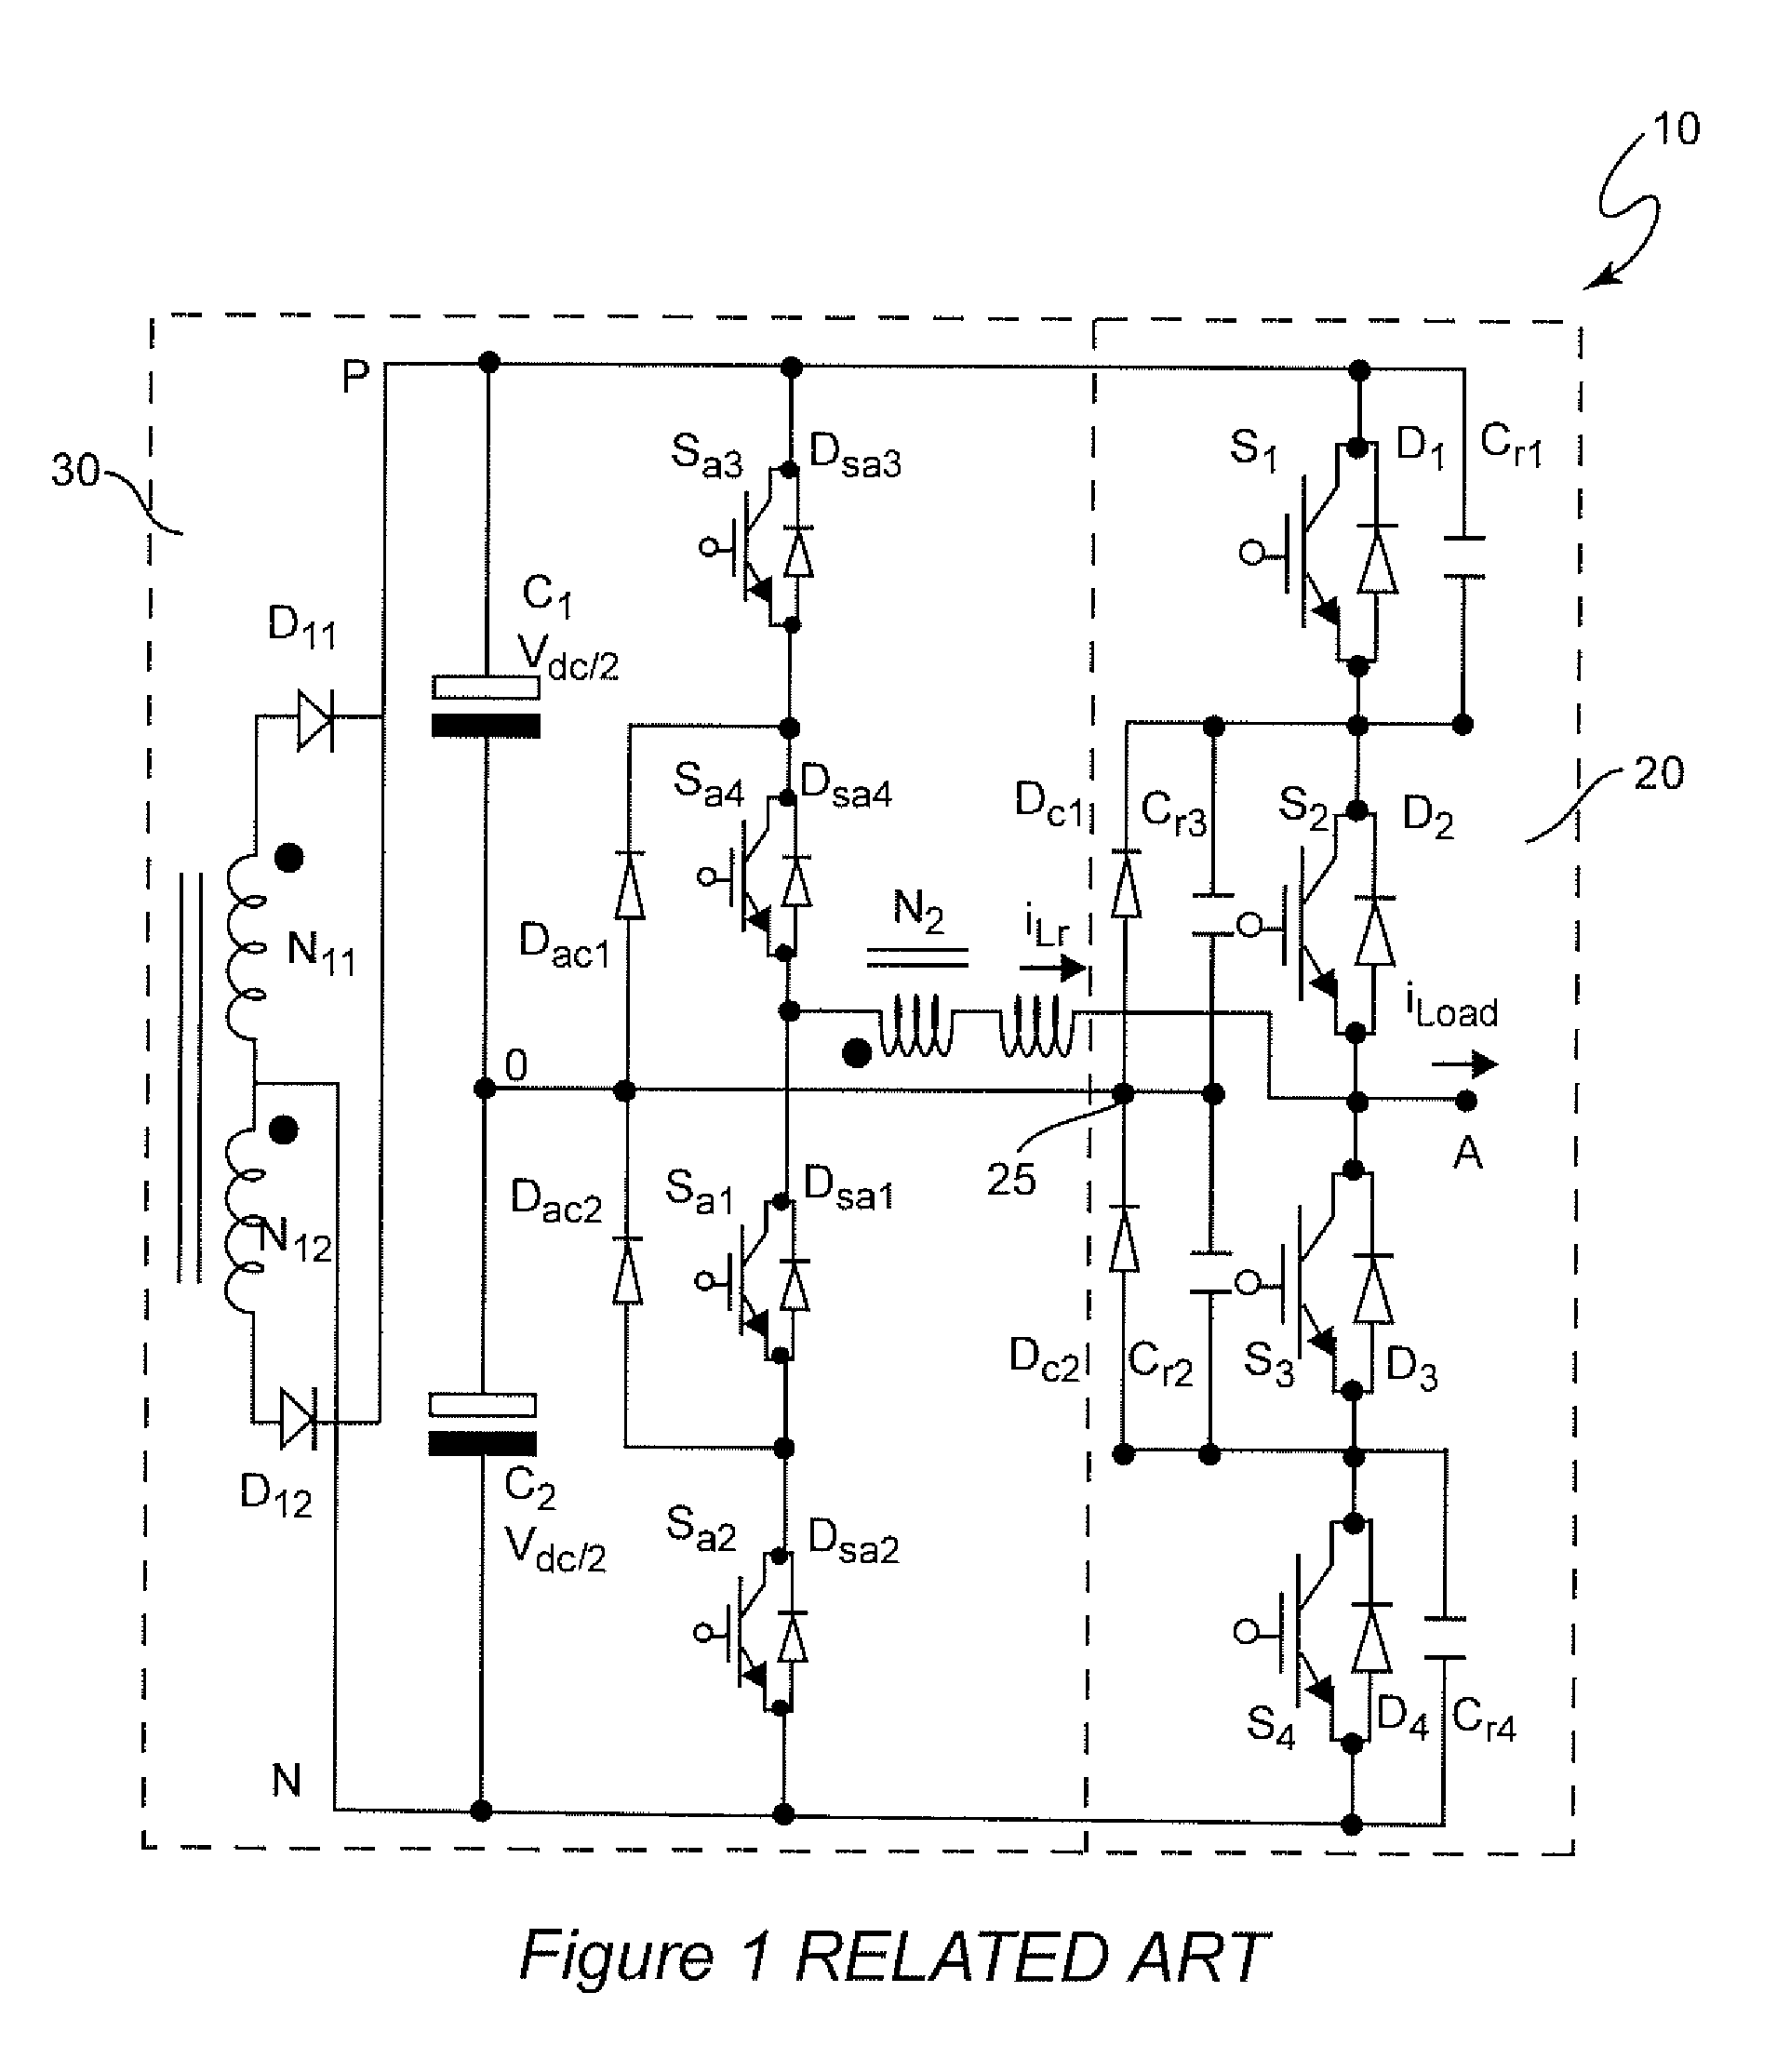 Three-Level Active Neutral Point Clamped Zero Voltage Switching Converter